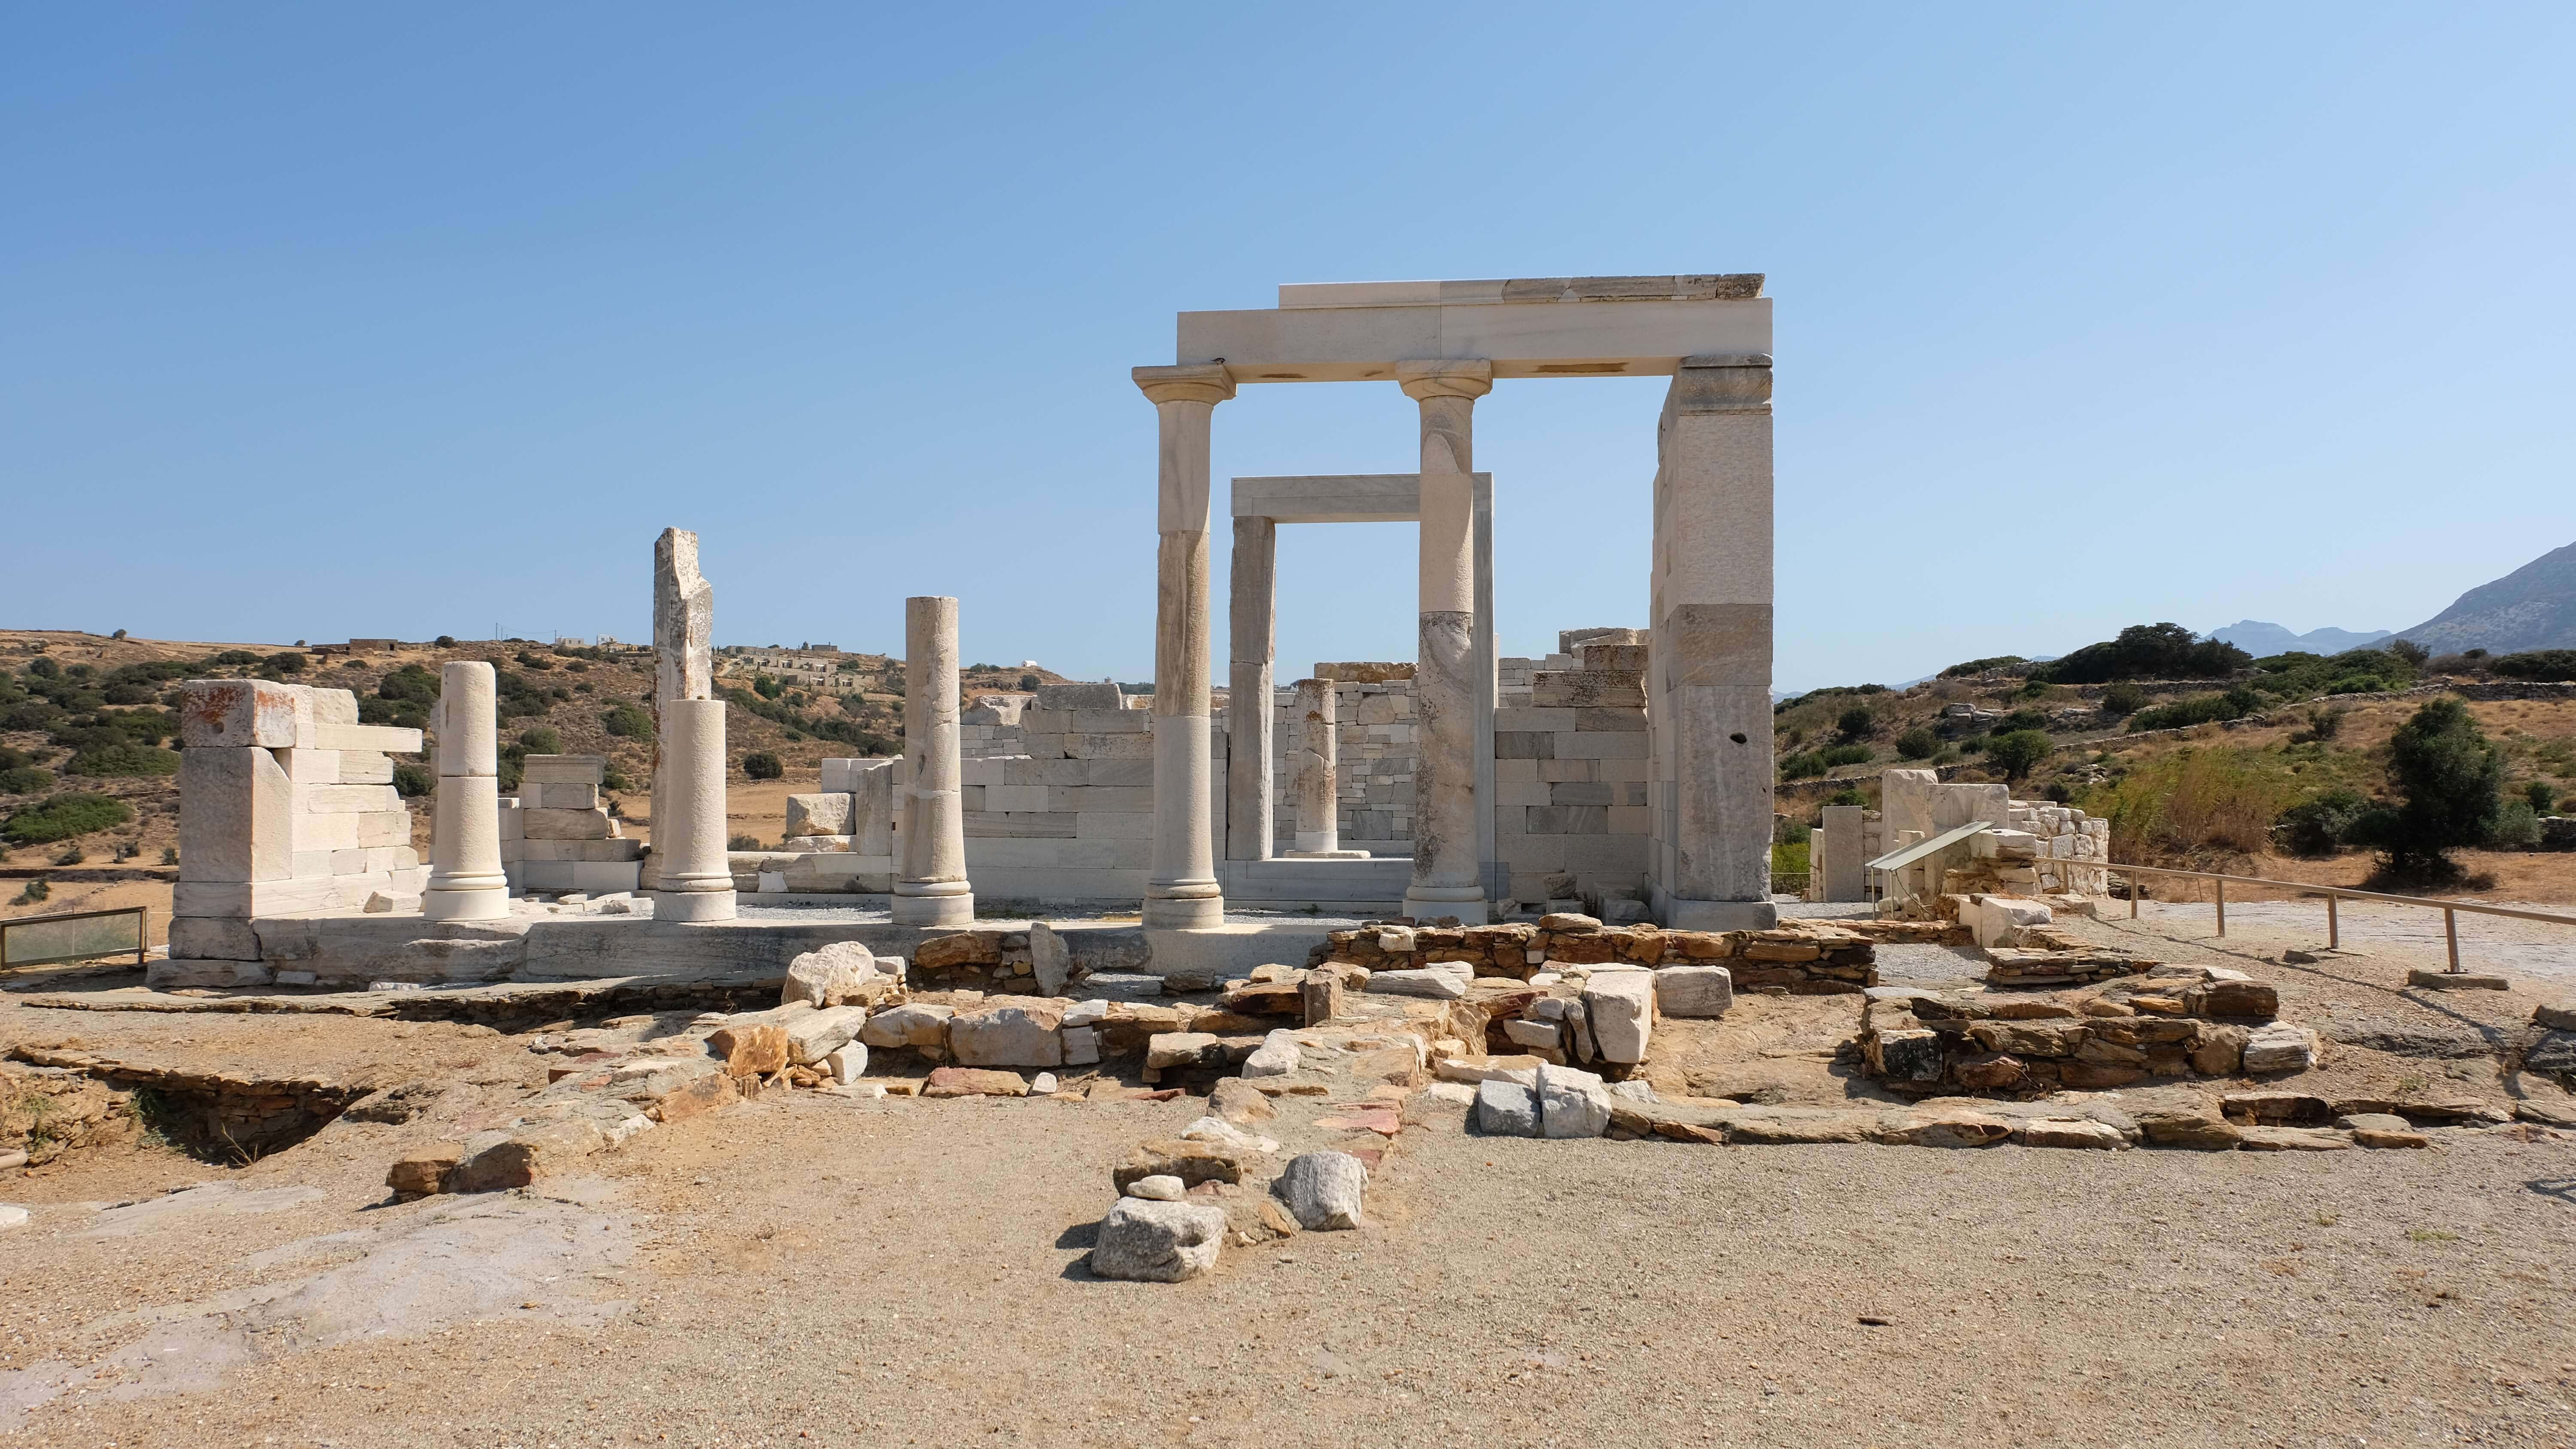 Things To Do In Naxos - 10 Amazing Places You Need To Explore - Temple of Demetra 